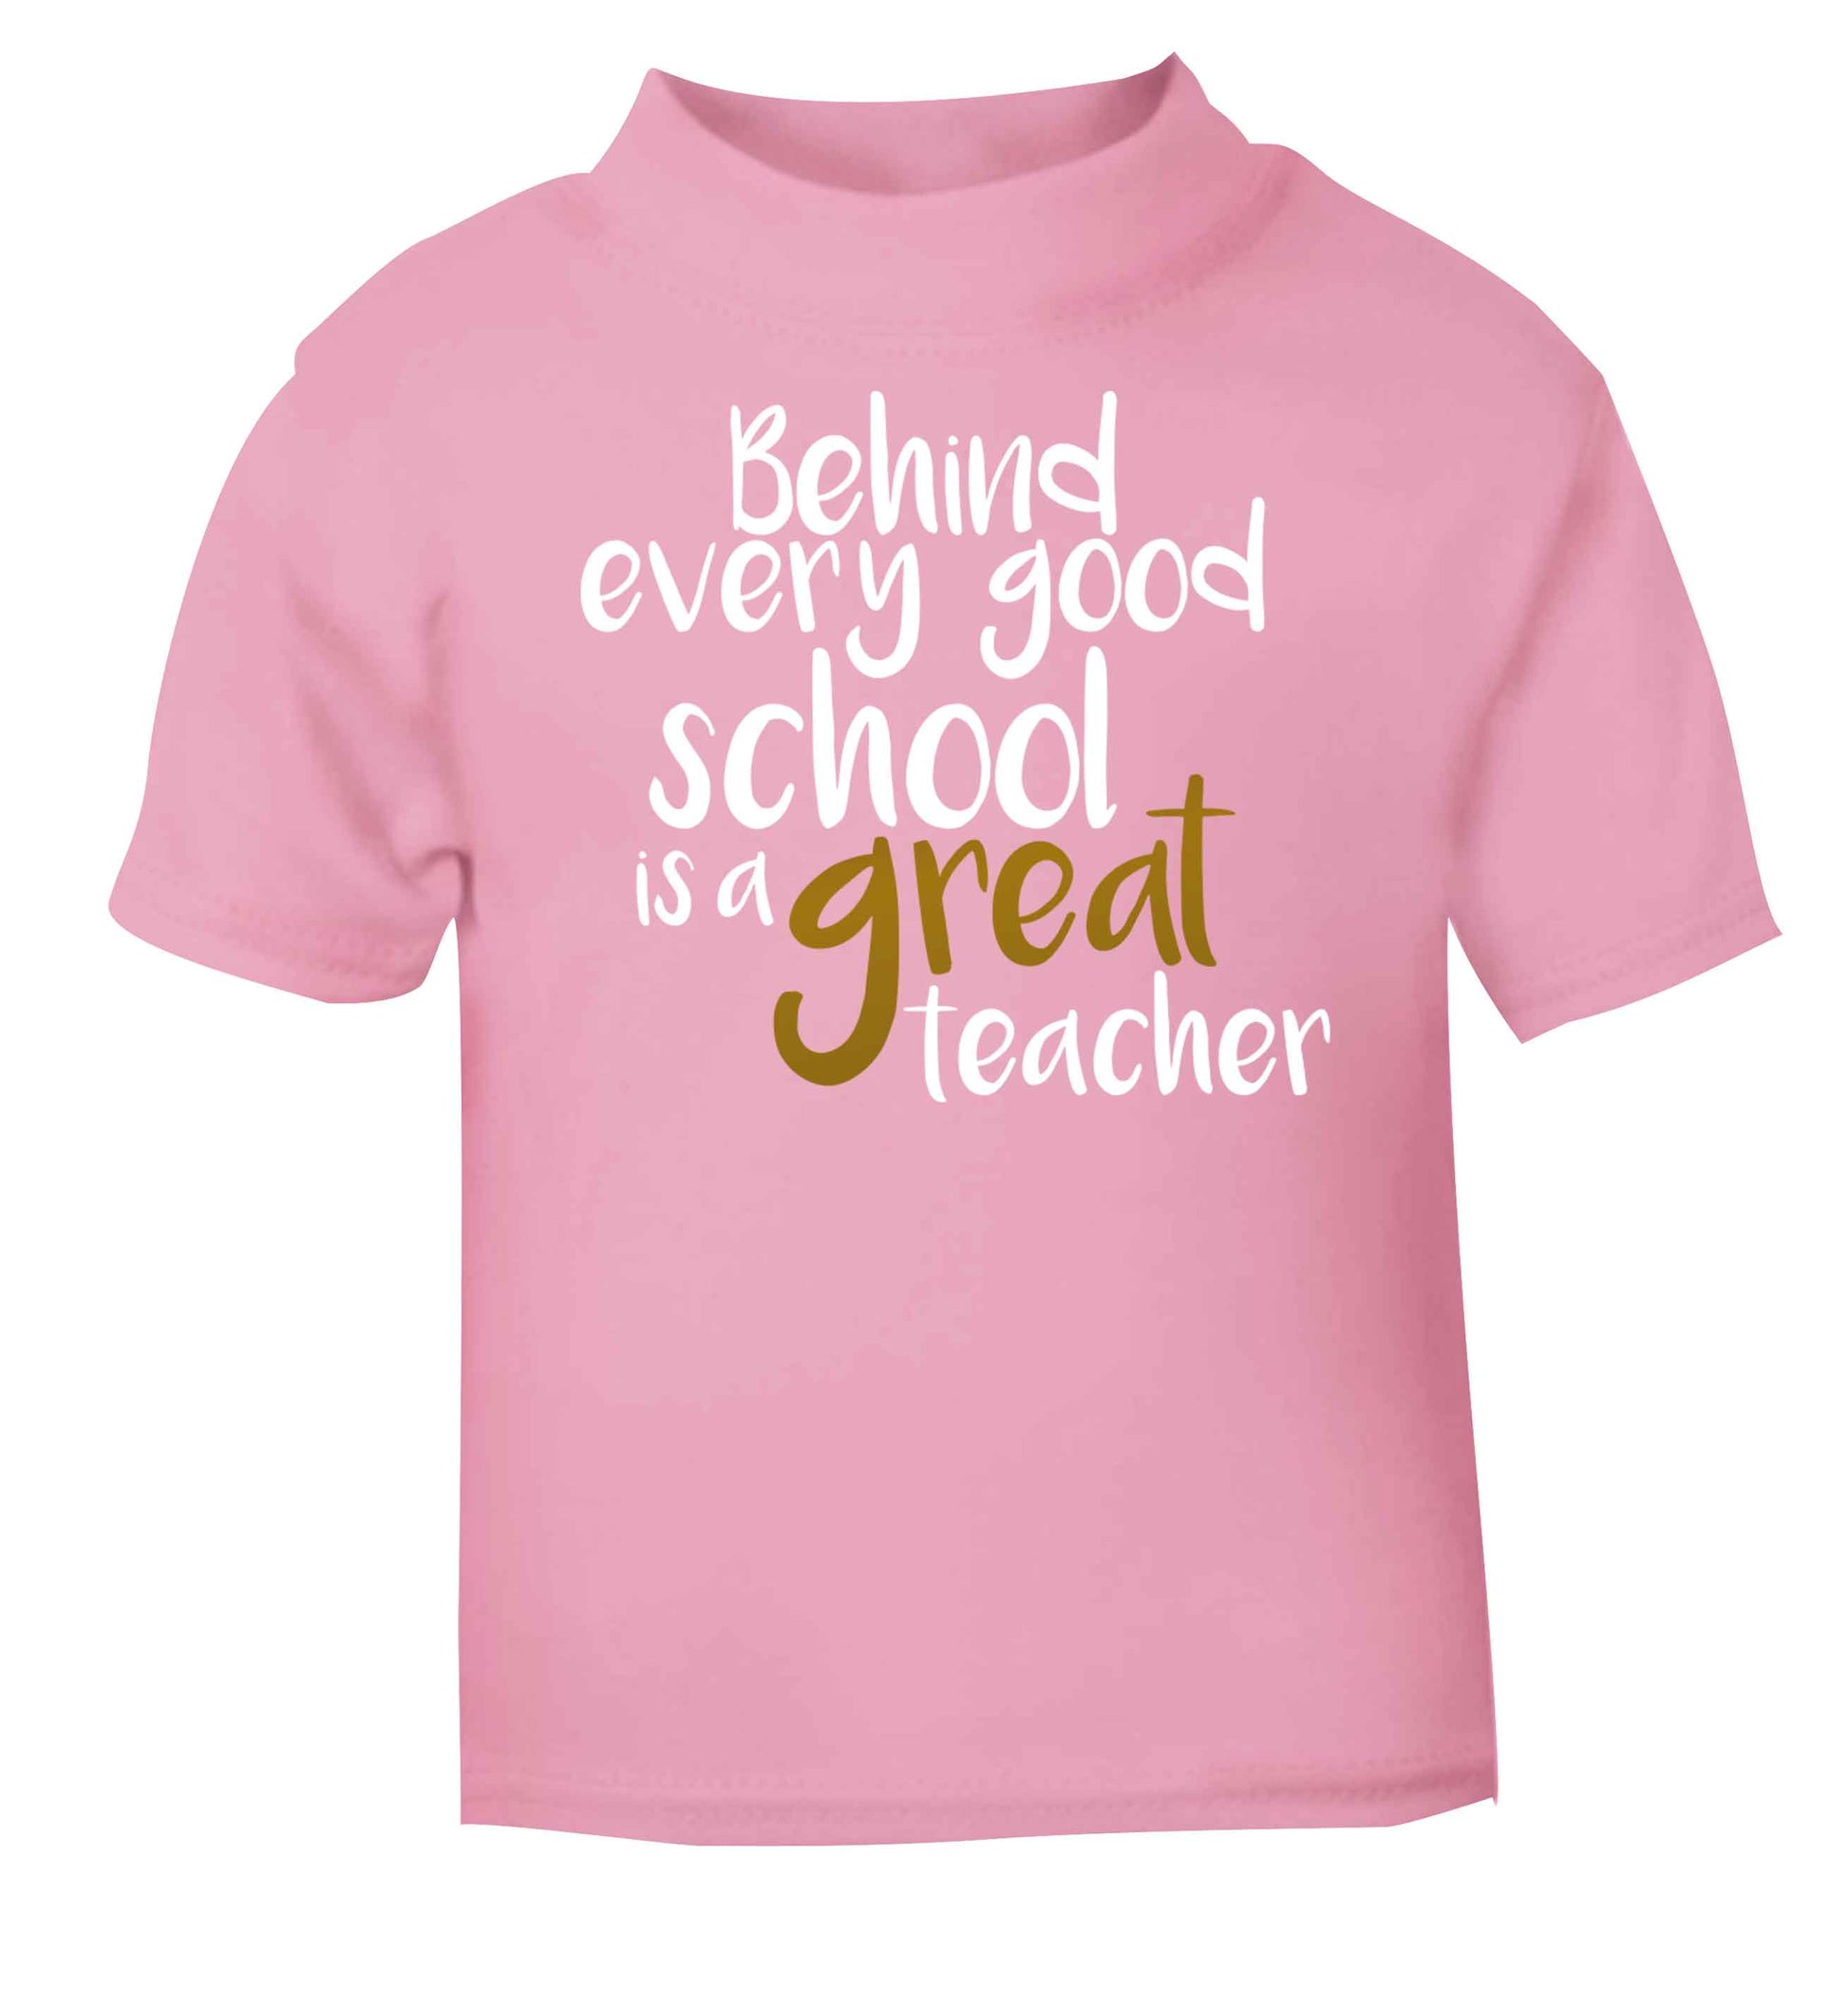 Behind every good school is a great teacher light pink baby toddler Tshirt 2 Years